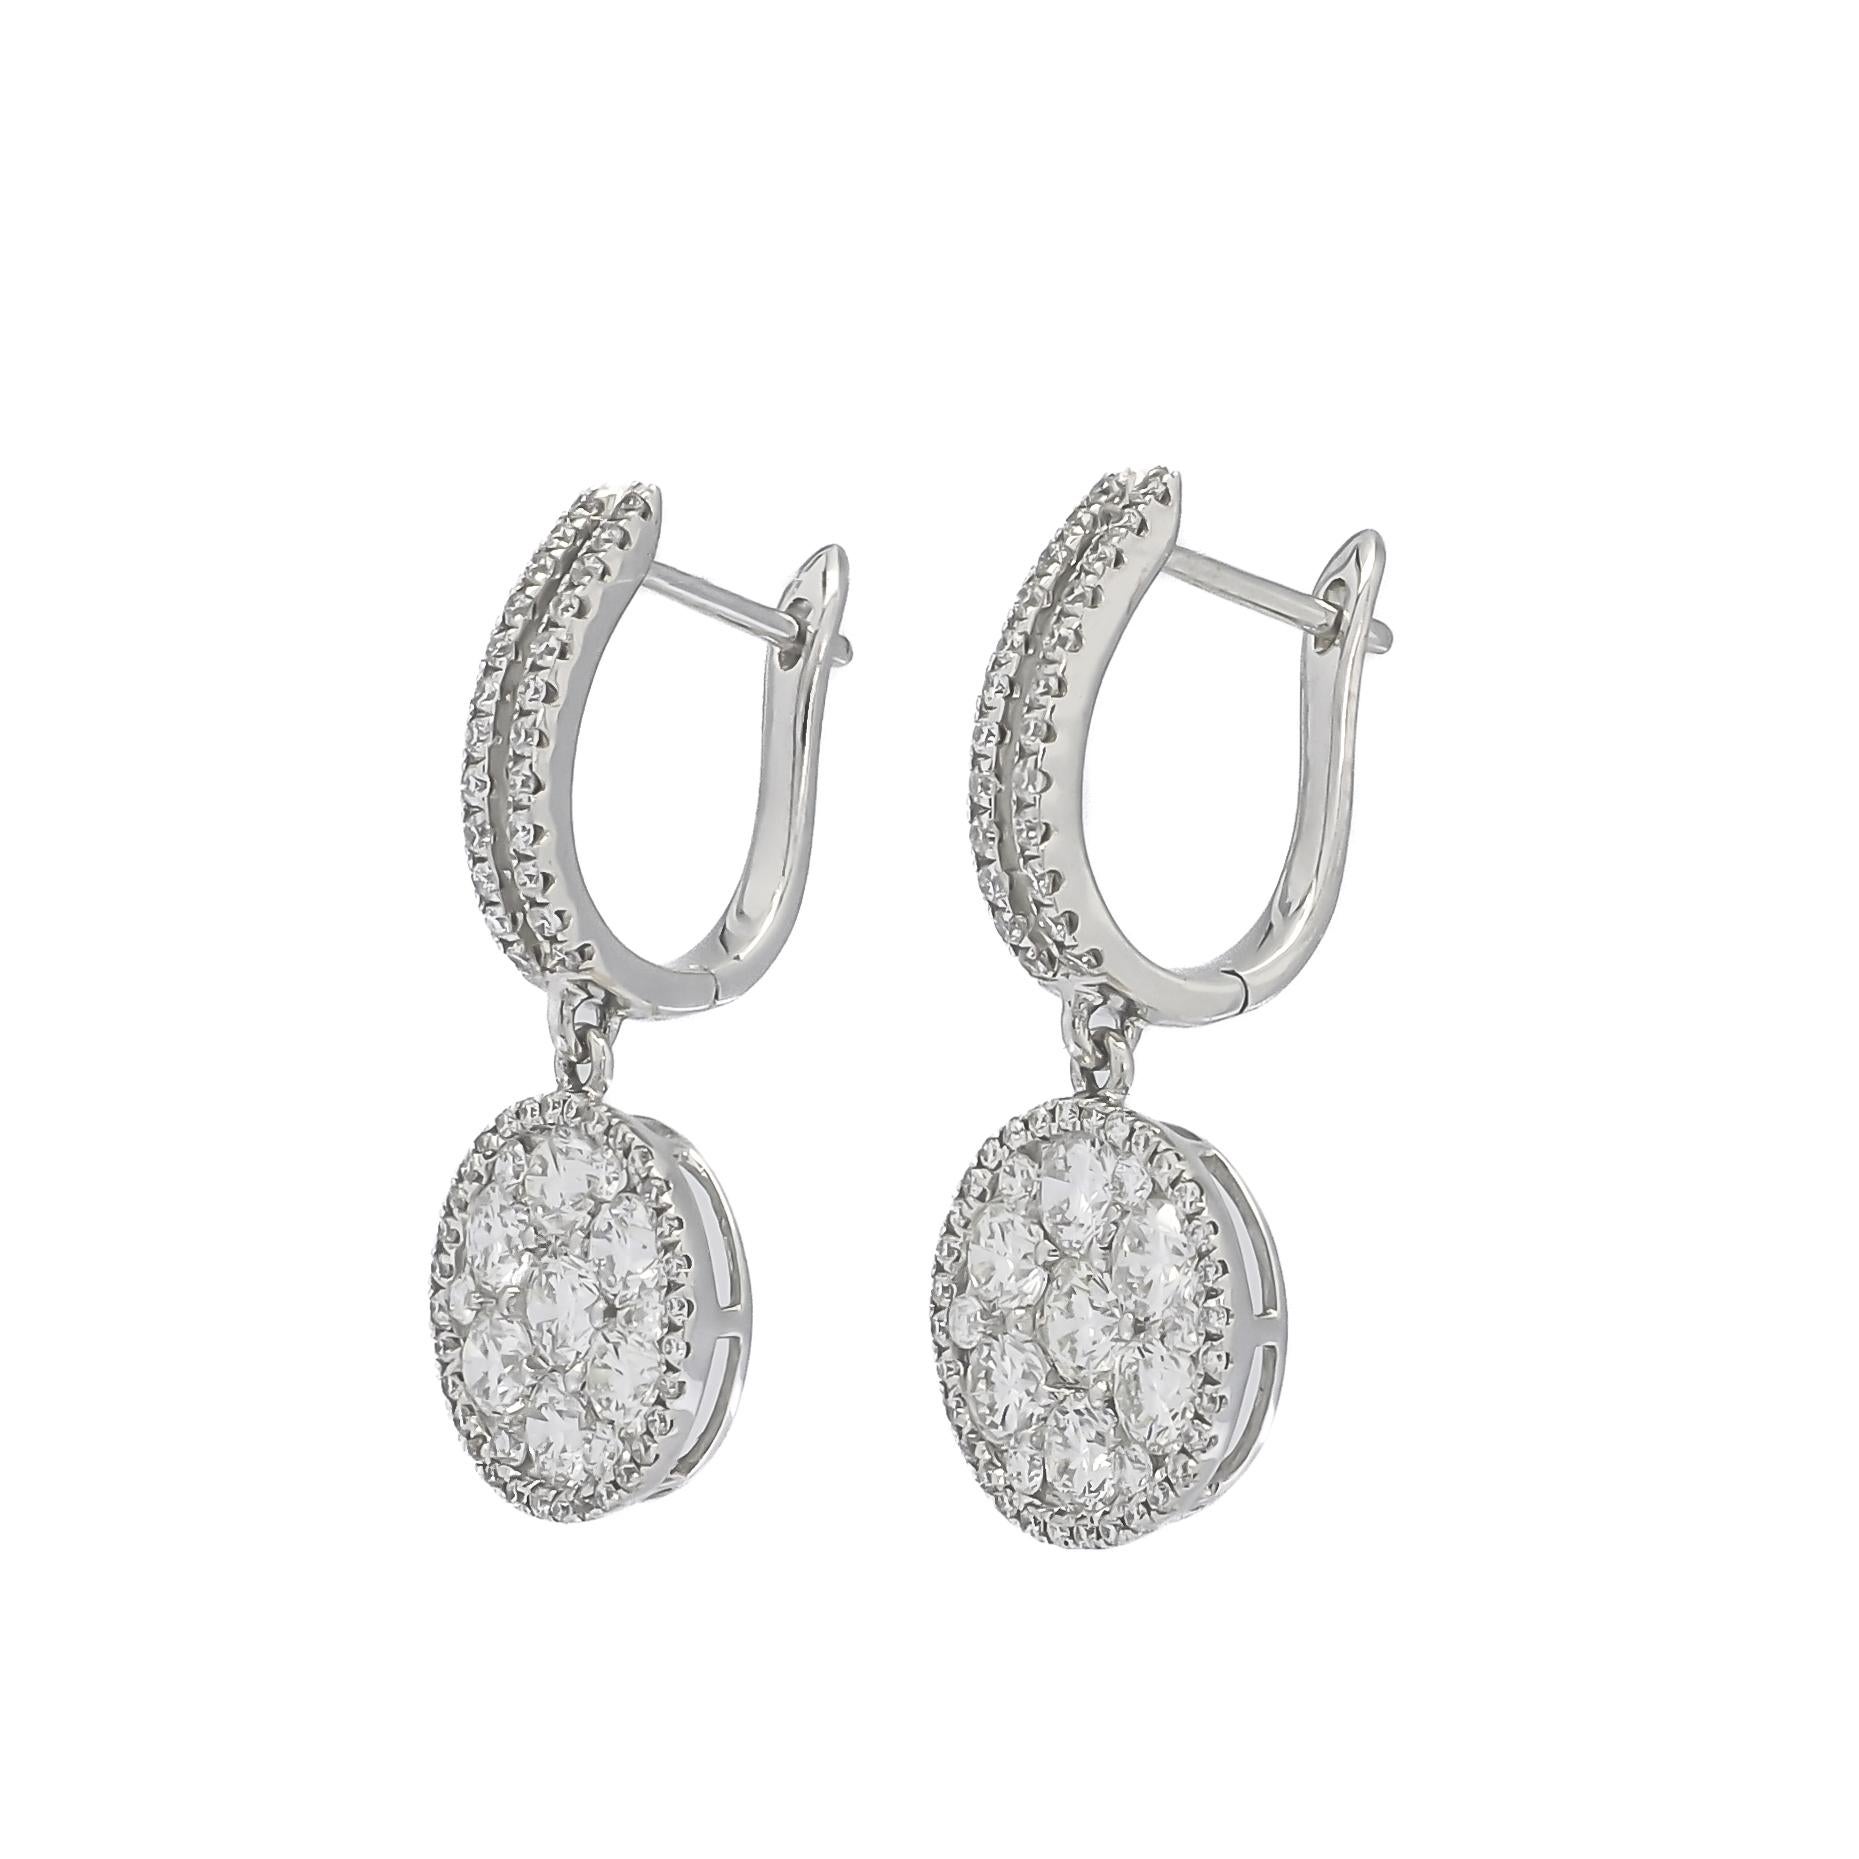 A captivating combination of round natural diamonds takes center stage, expertly arranged in a halo illusion setting within a graceful drop dangler, accompanied by two rows of diamond Huggies. This meticulously crafted ensemble is a true testament